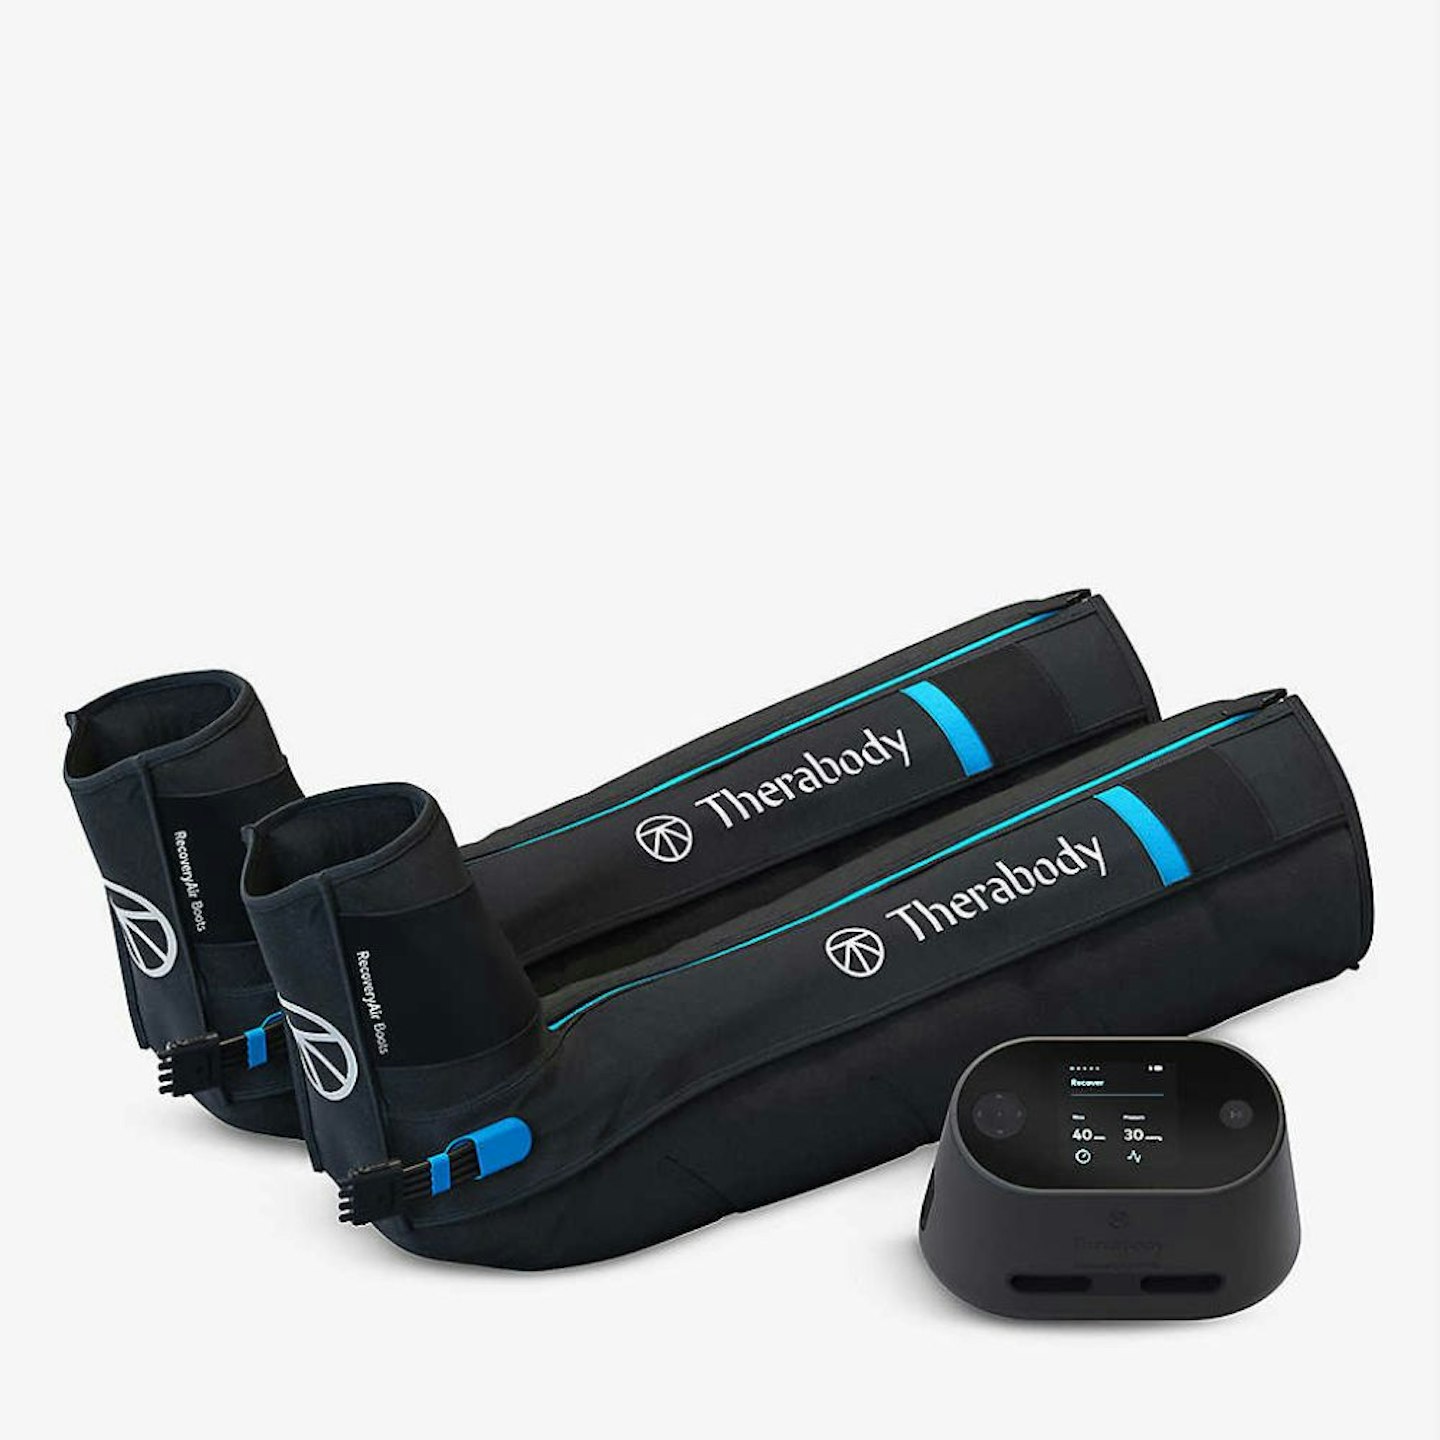 THERABODY RecoveryAir PRO wireless compression system